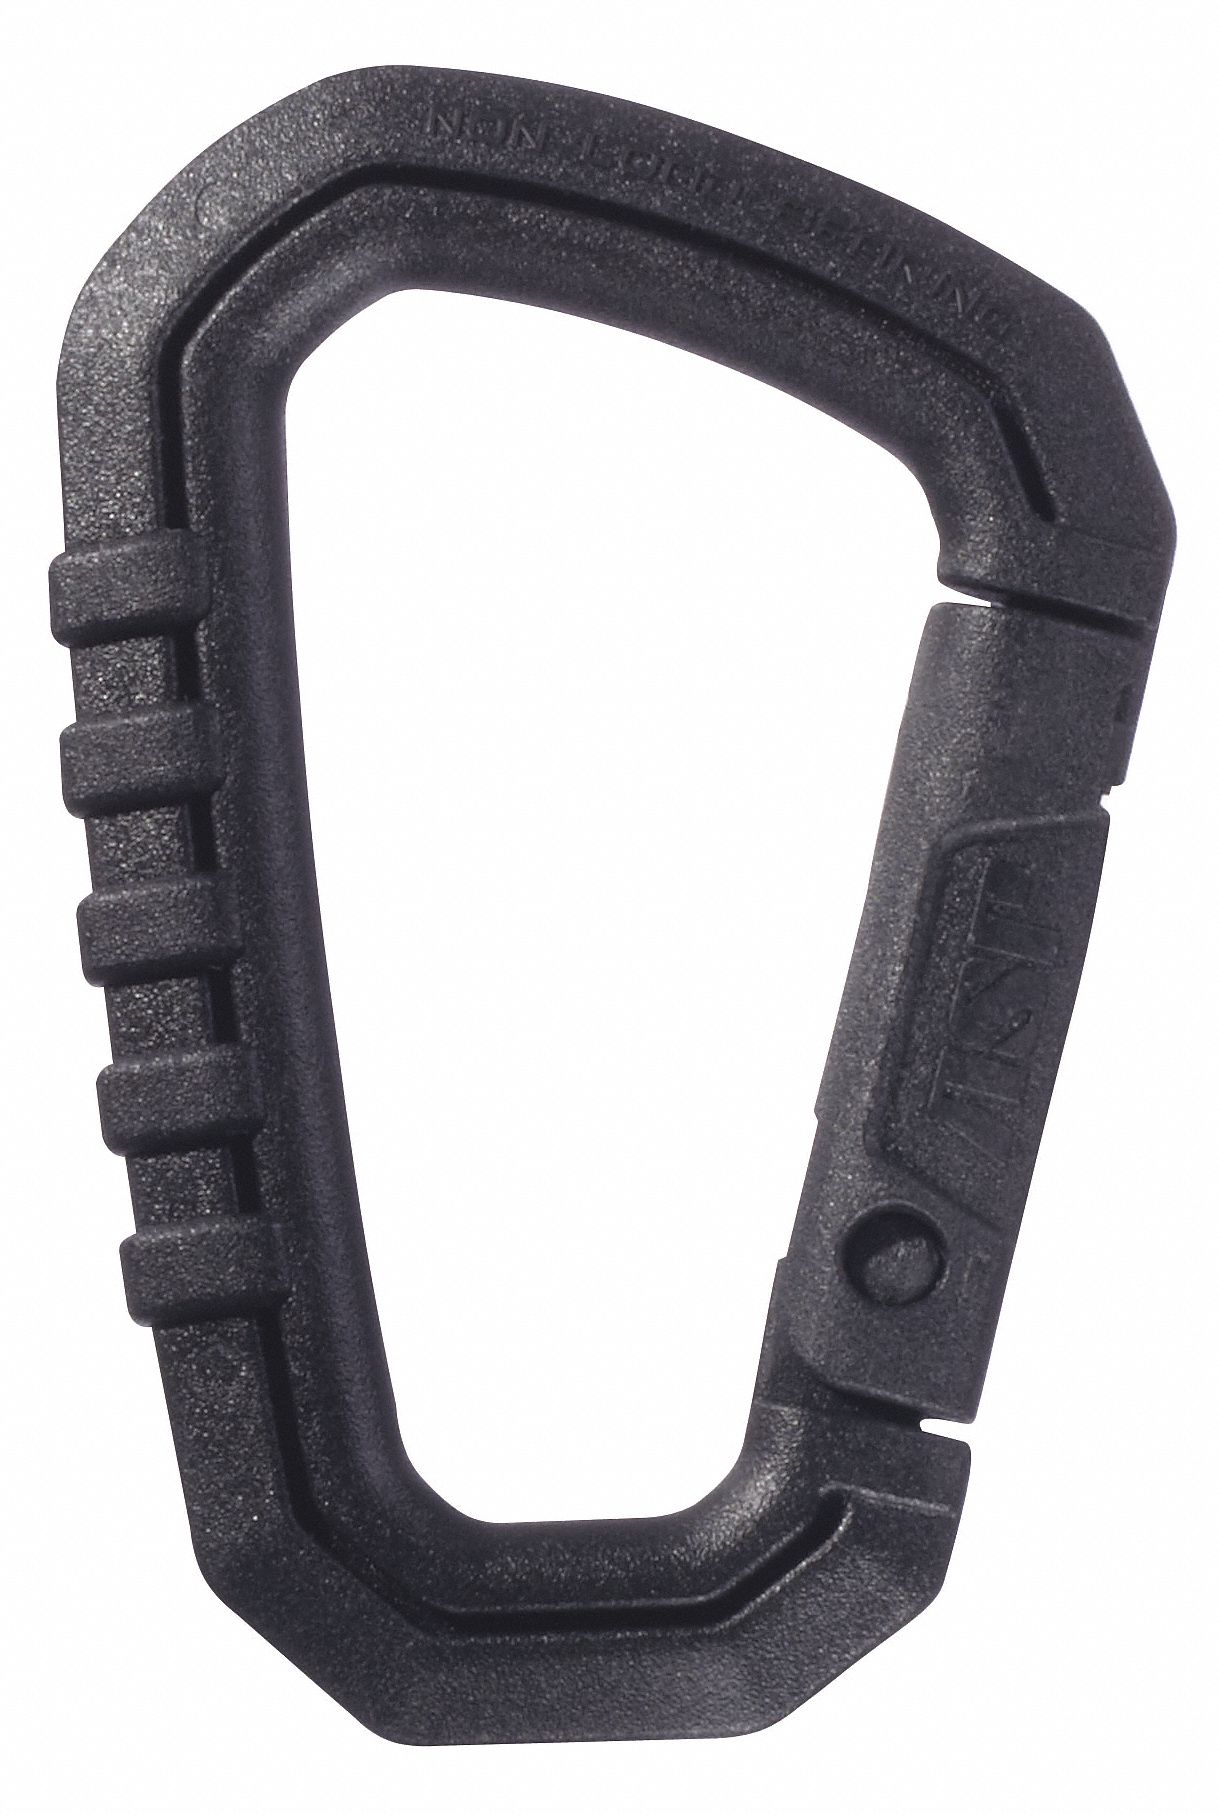 Mini Carabiner,  Polymer,  3/4 in Gate Opening,  2 1/2 in Length,  Auto-Lock